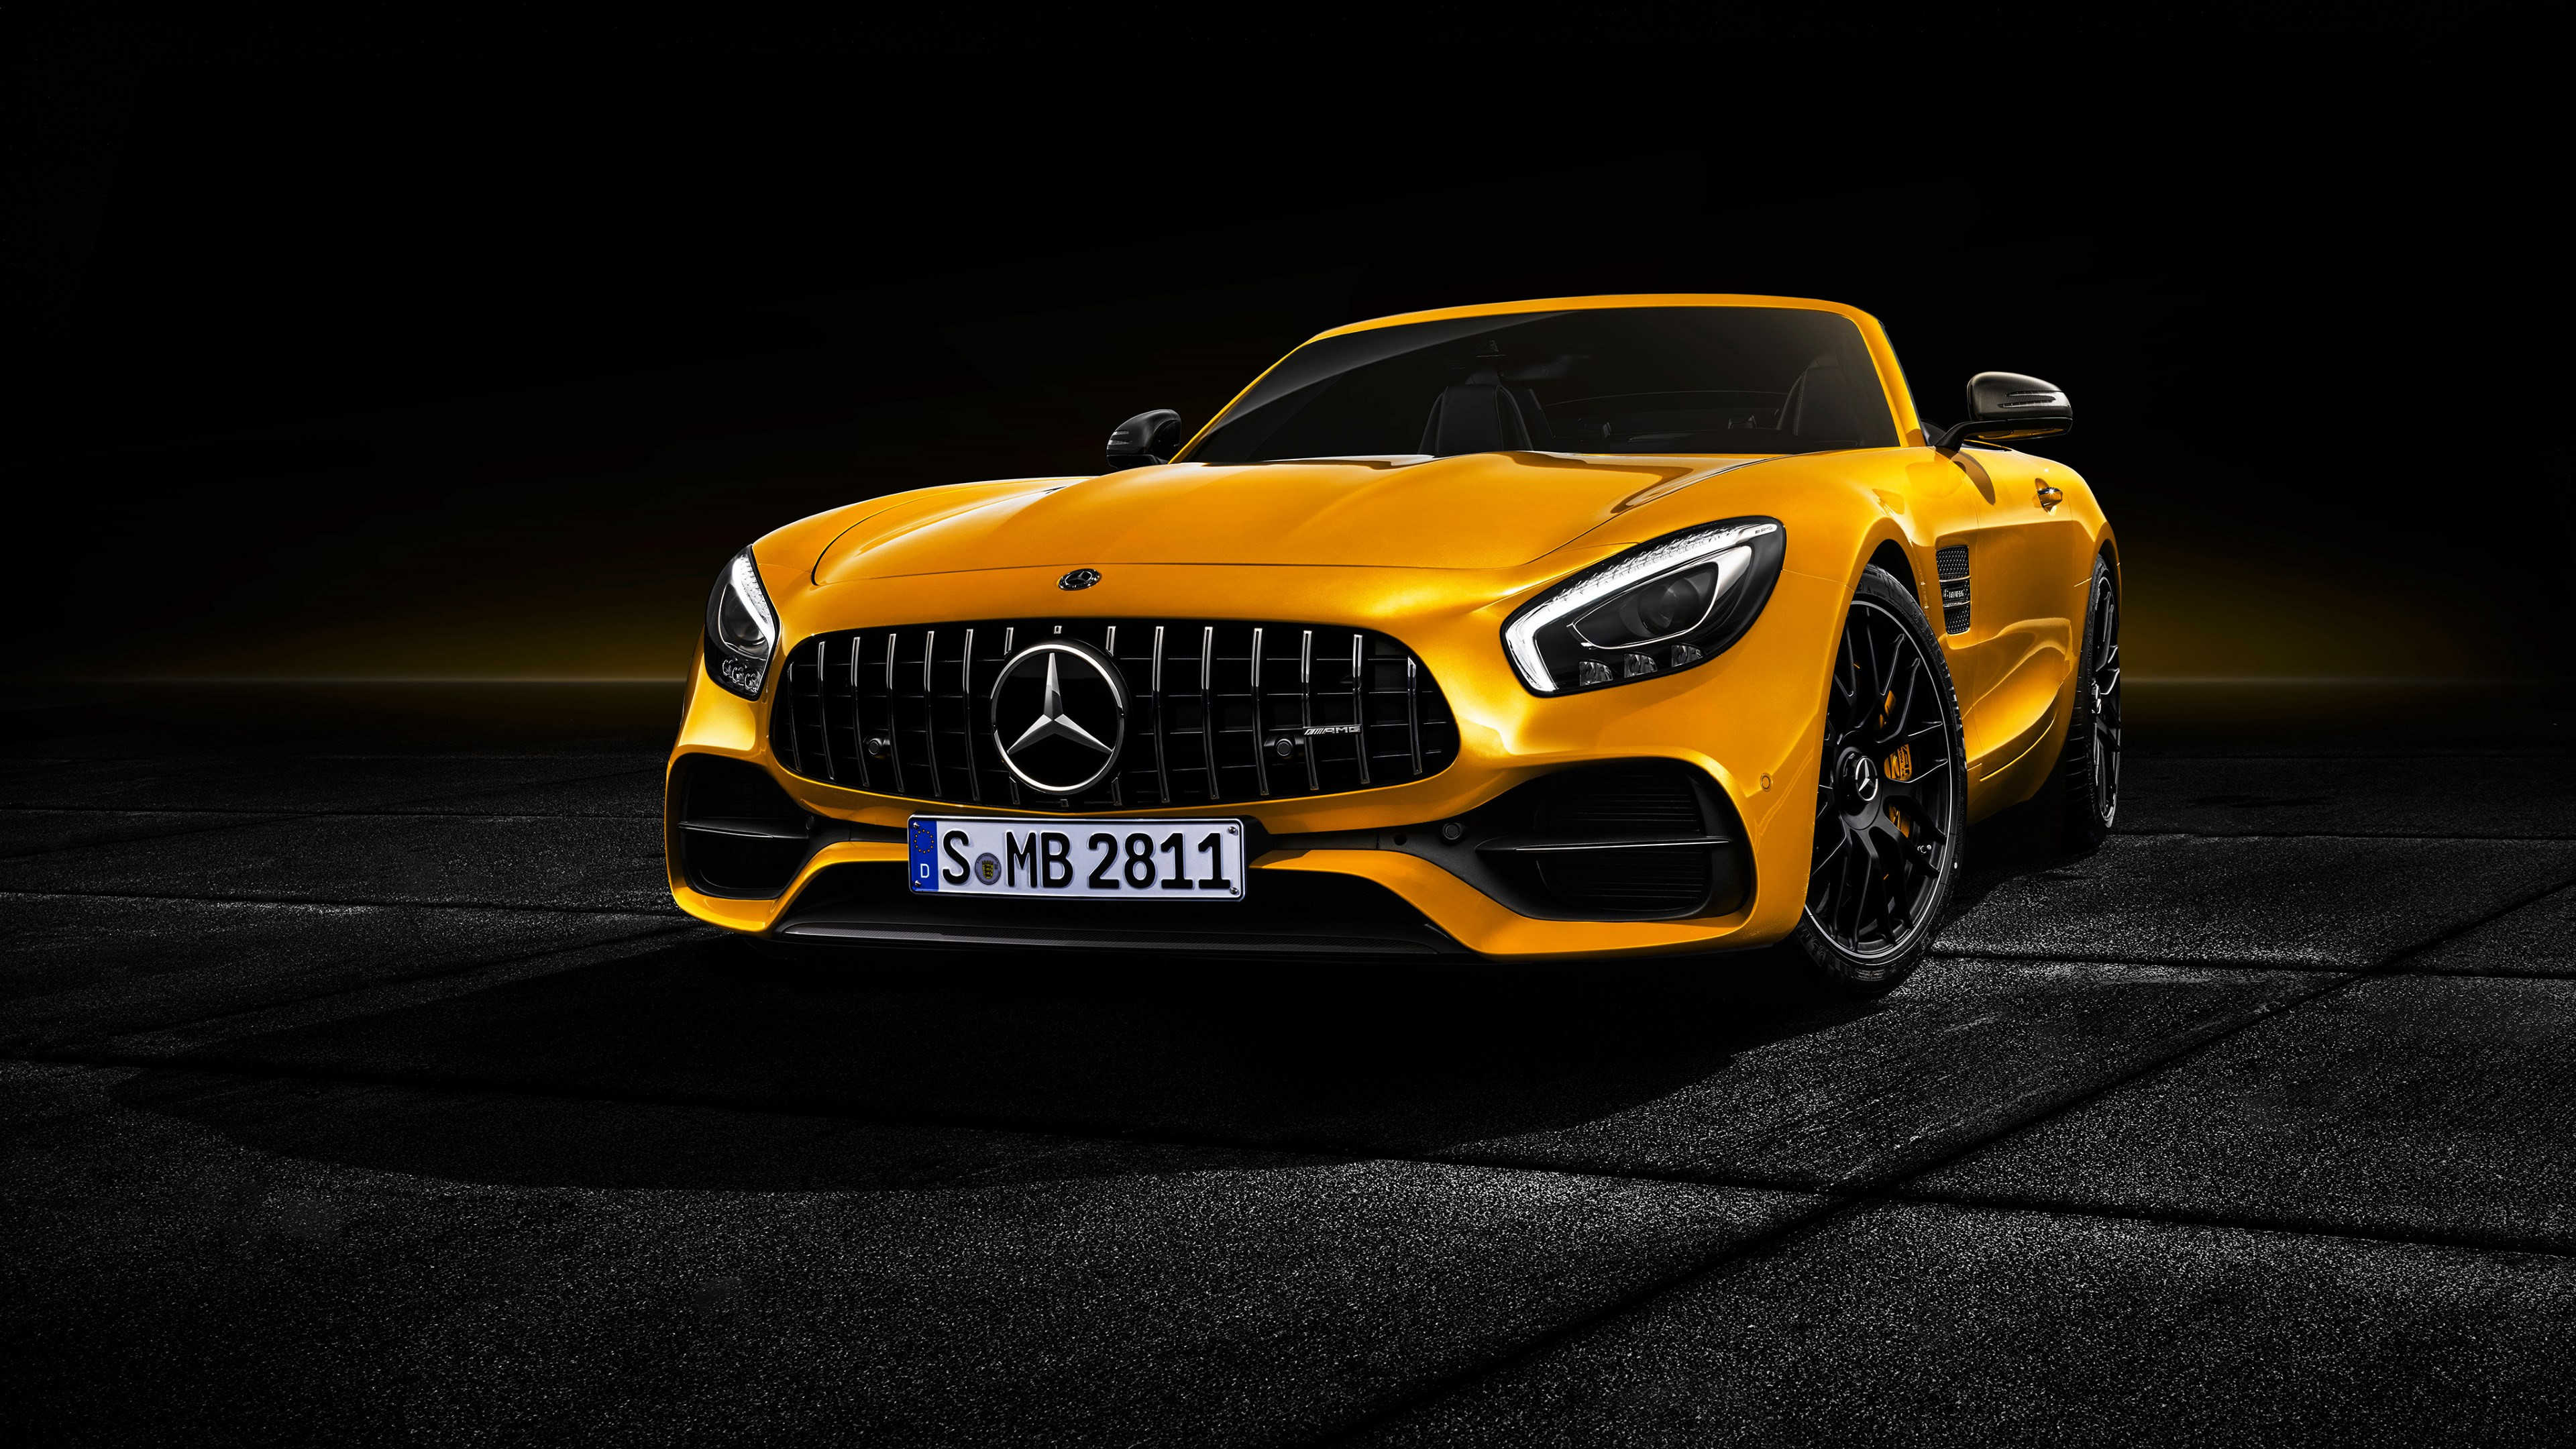 Mercedes Amg Gt S Roadster Yellow Uhd 4k Wallpaper - Mercedes Benz Amg Gt S 2019 - HD Wallpaper 